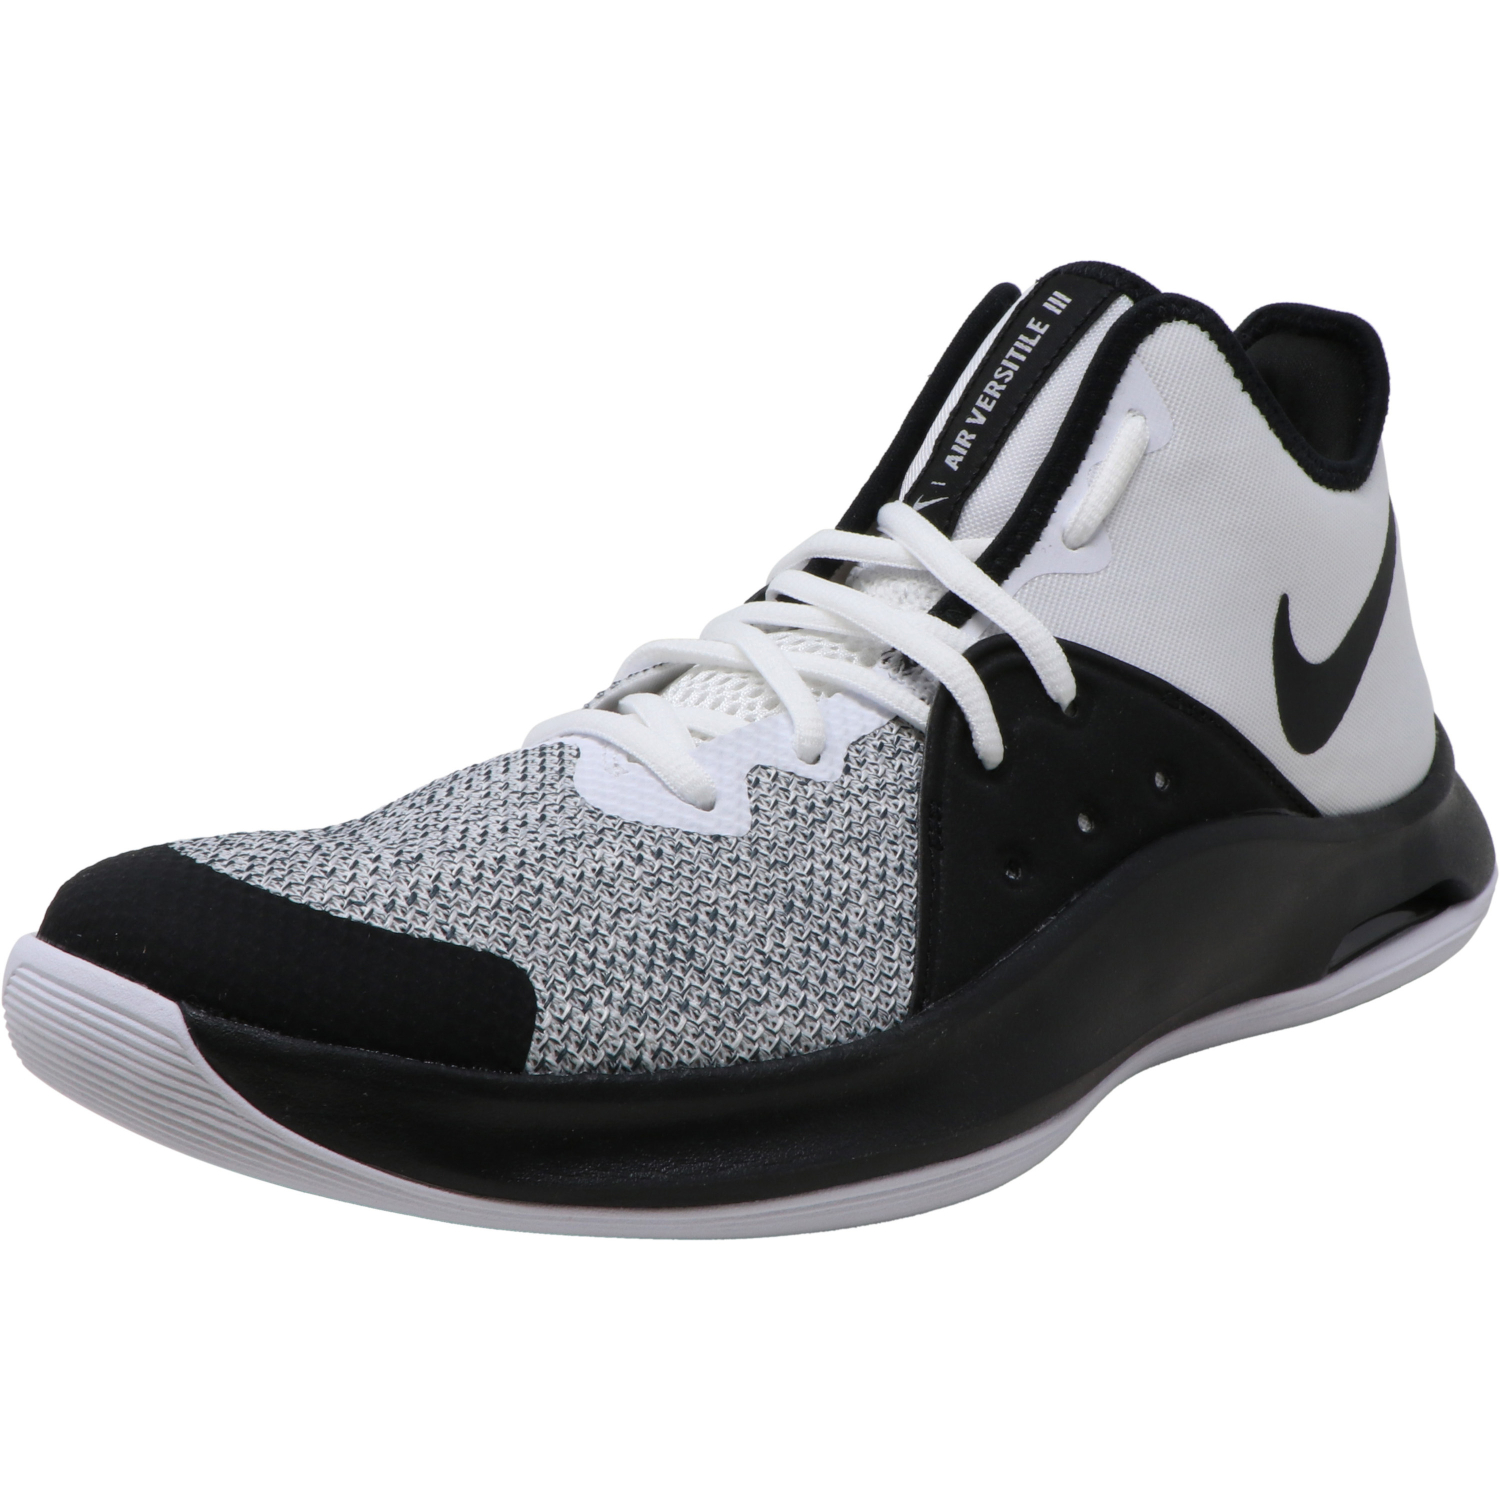 nike basketball shoes high ankle